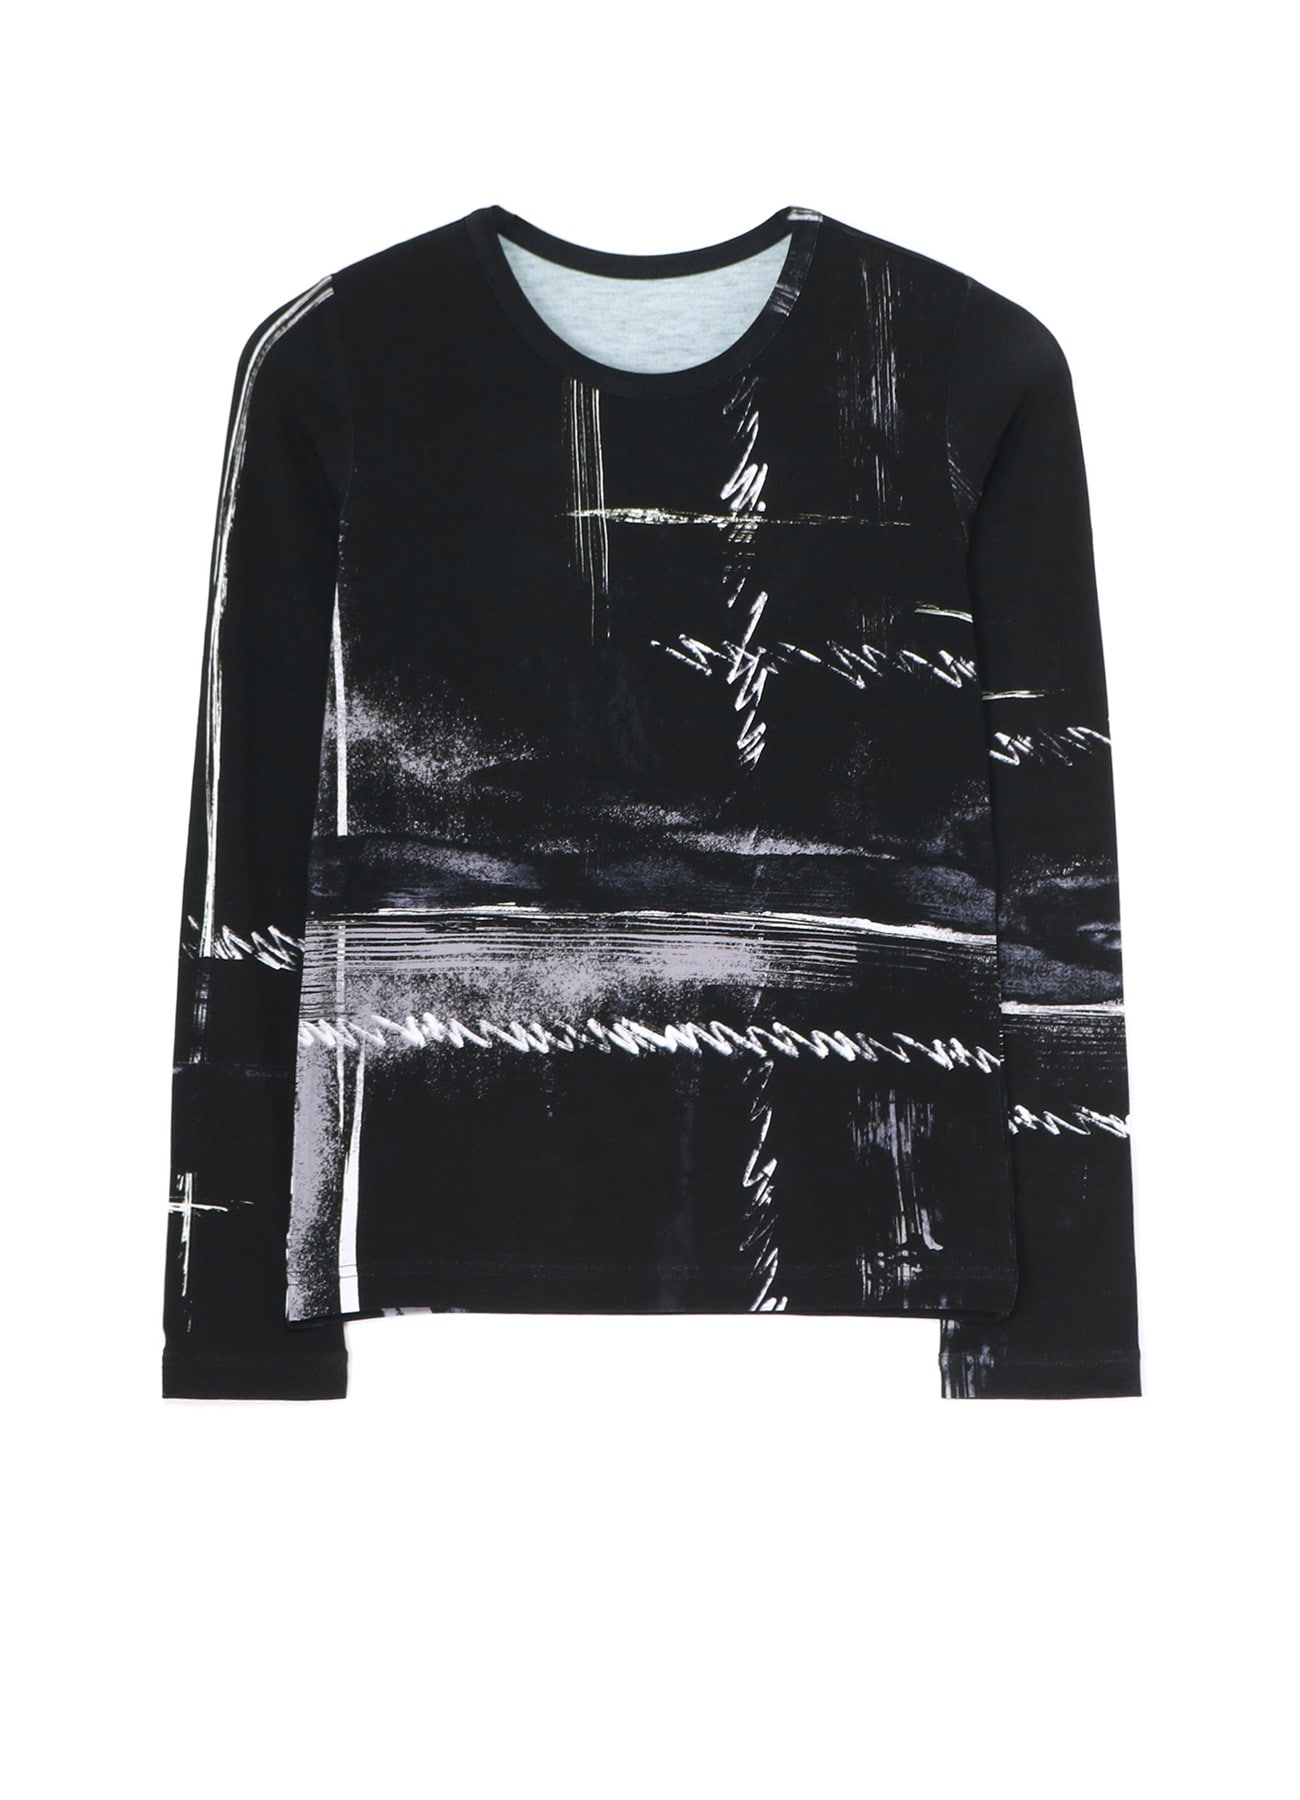 RAYON JERSEY BLURRED CHECK LONG SLEEVE T(S Black): Y's 